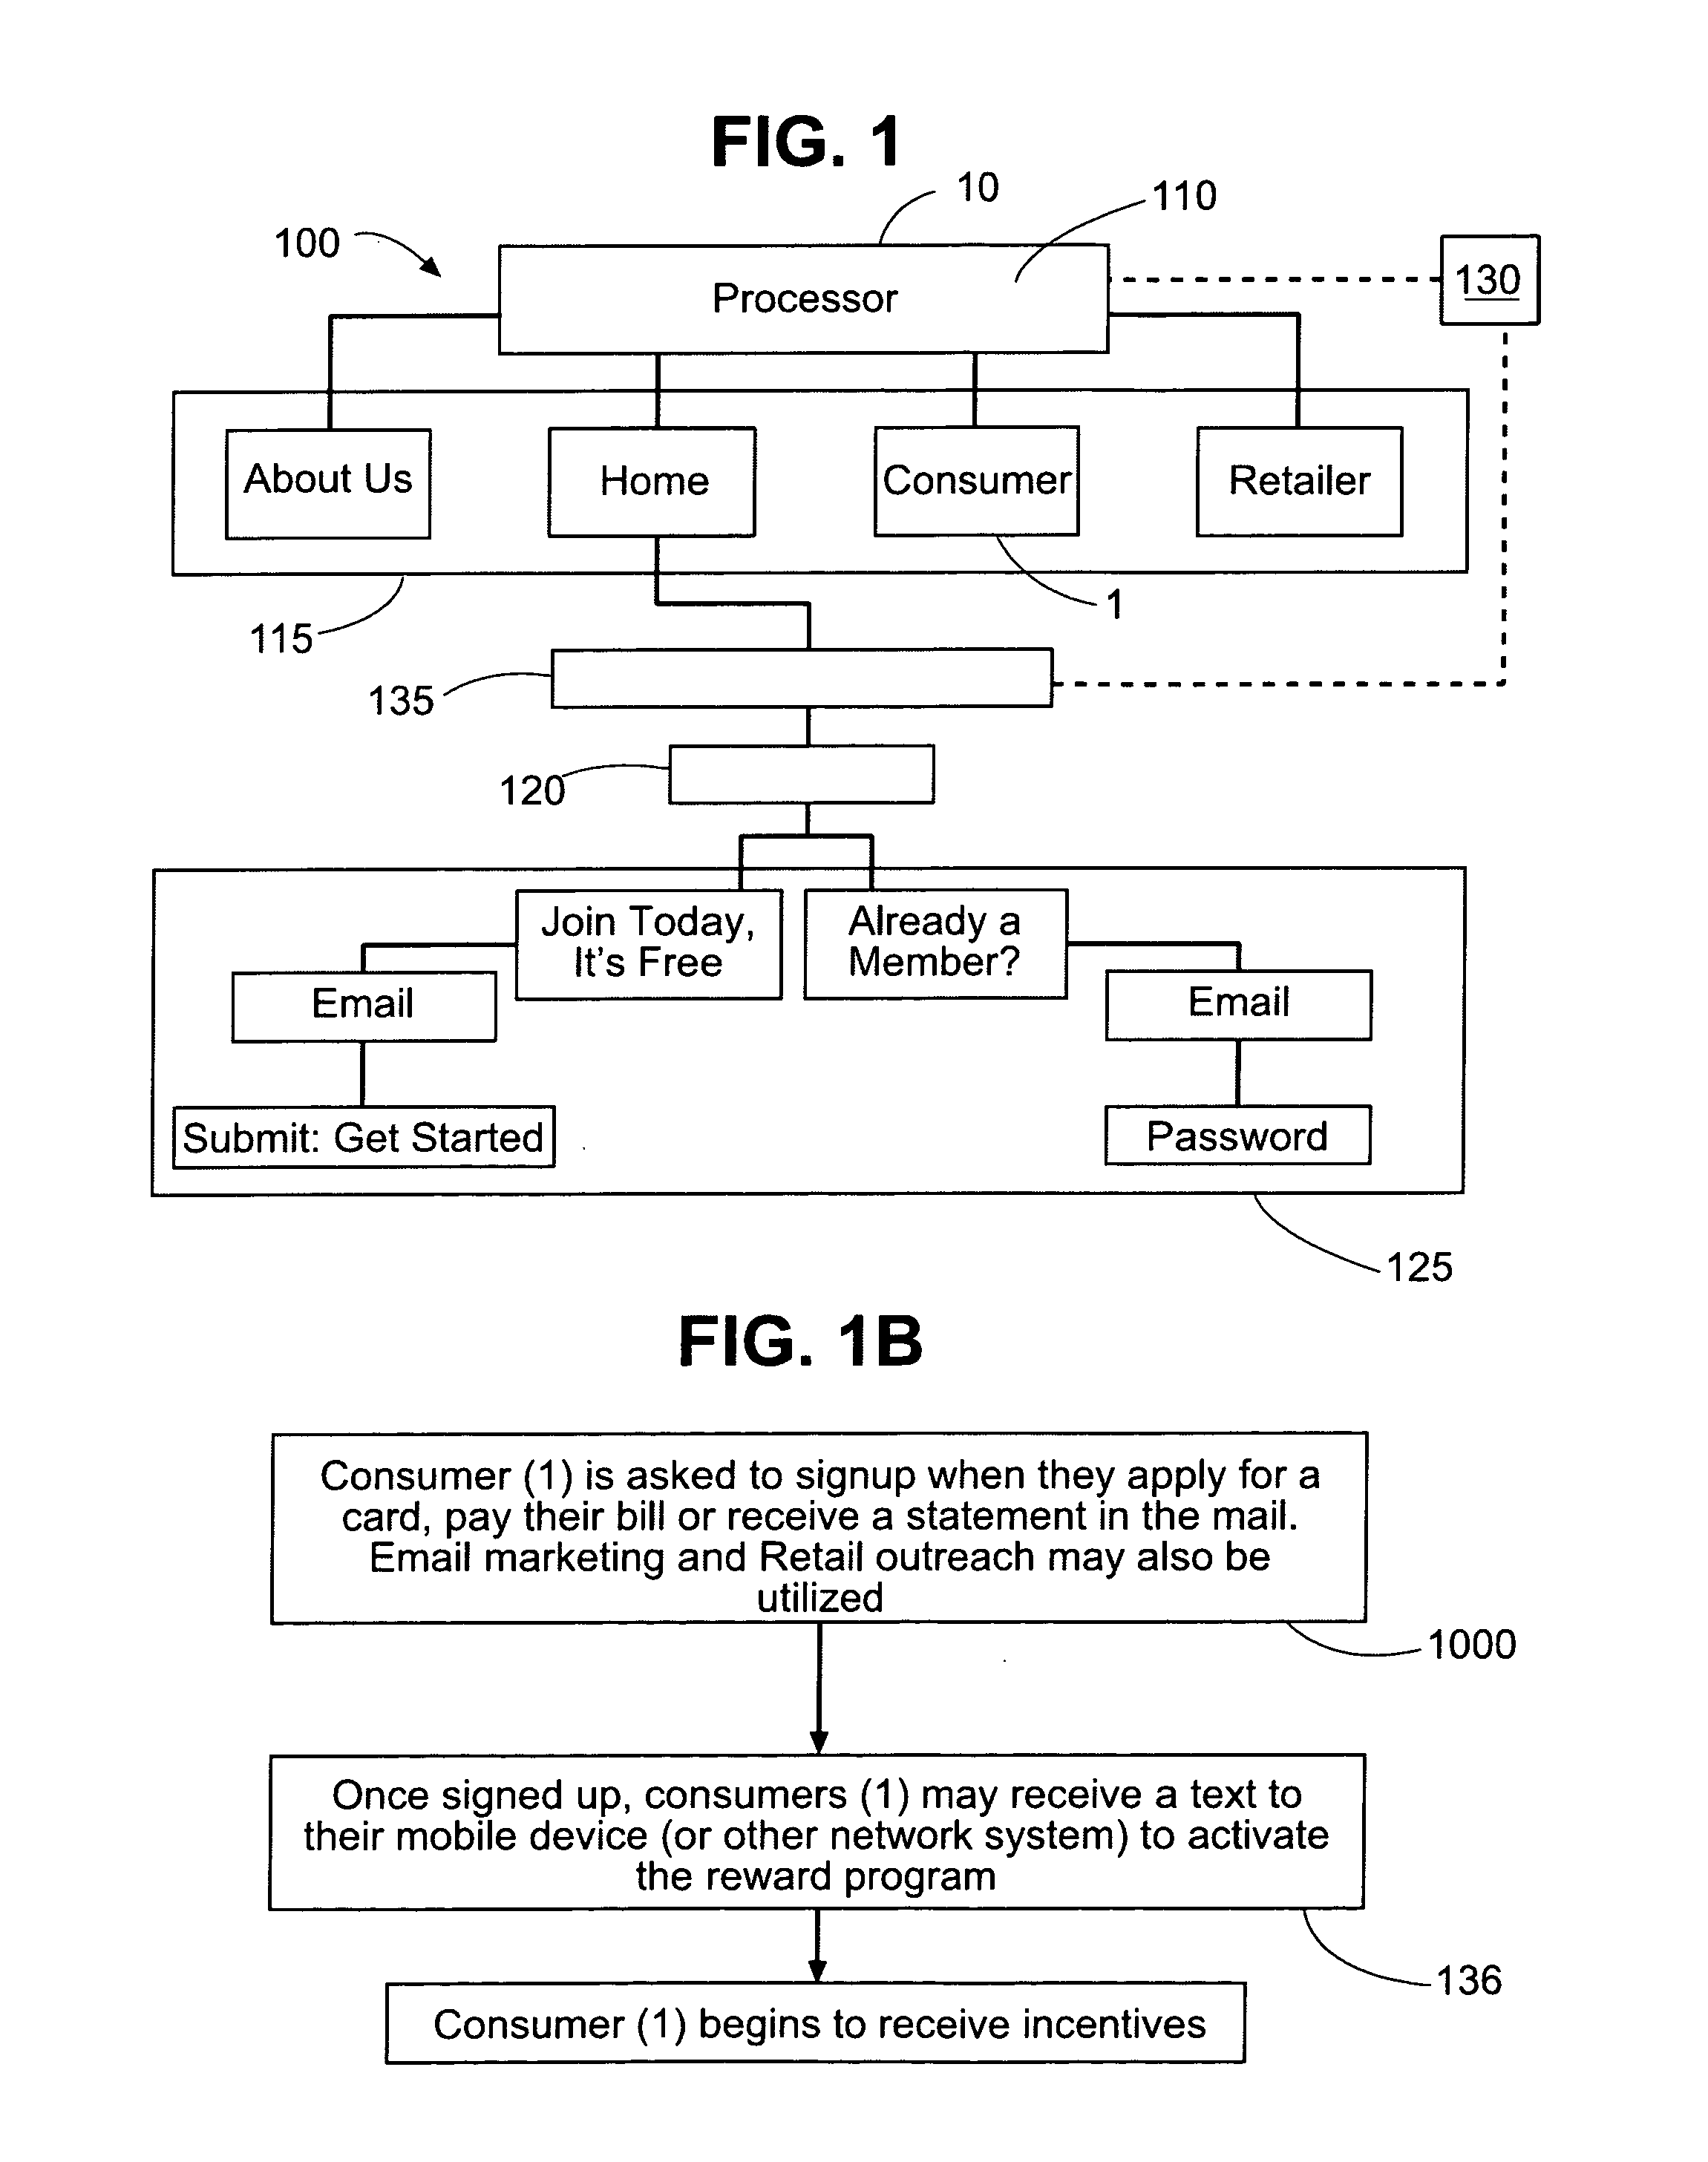 Electronic coupon creation deployment, transference, validation management, clearance, redemption and reporting system and interactive participation of individuals and groups within the system